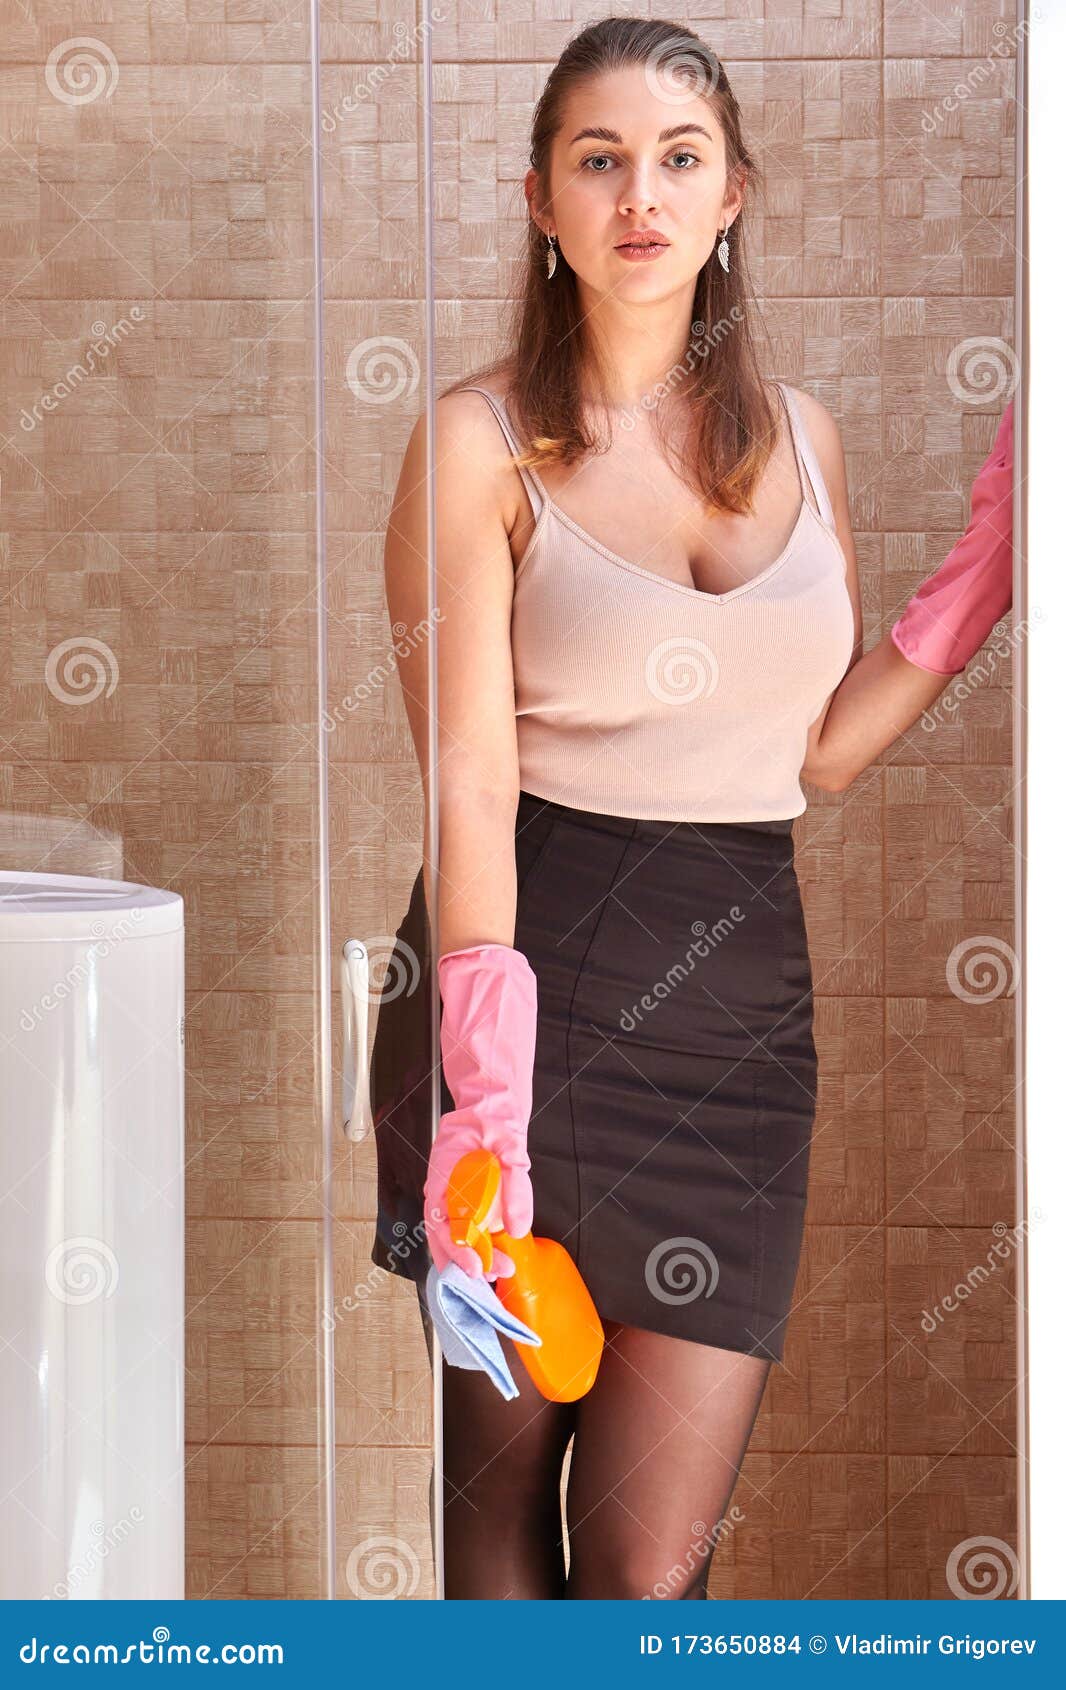 Cleaning Maid Services Sexy